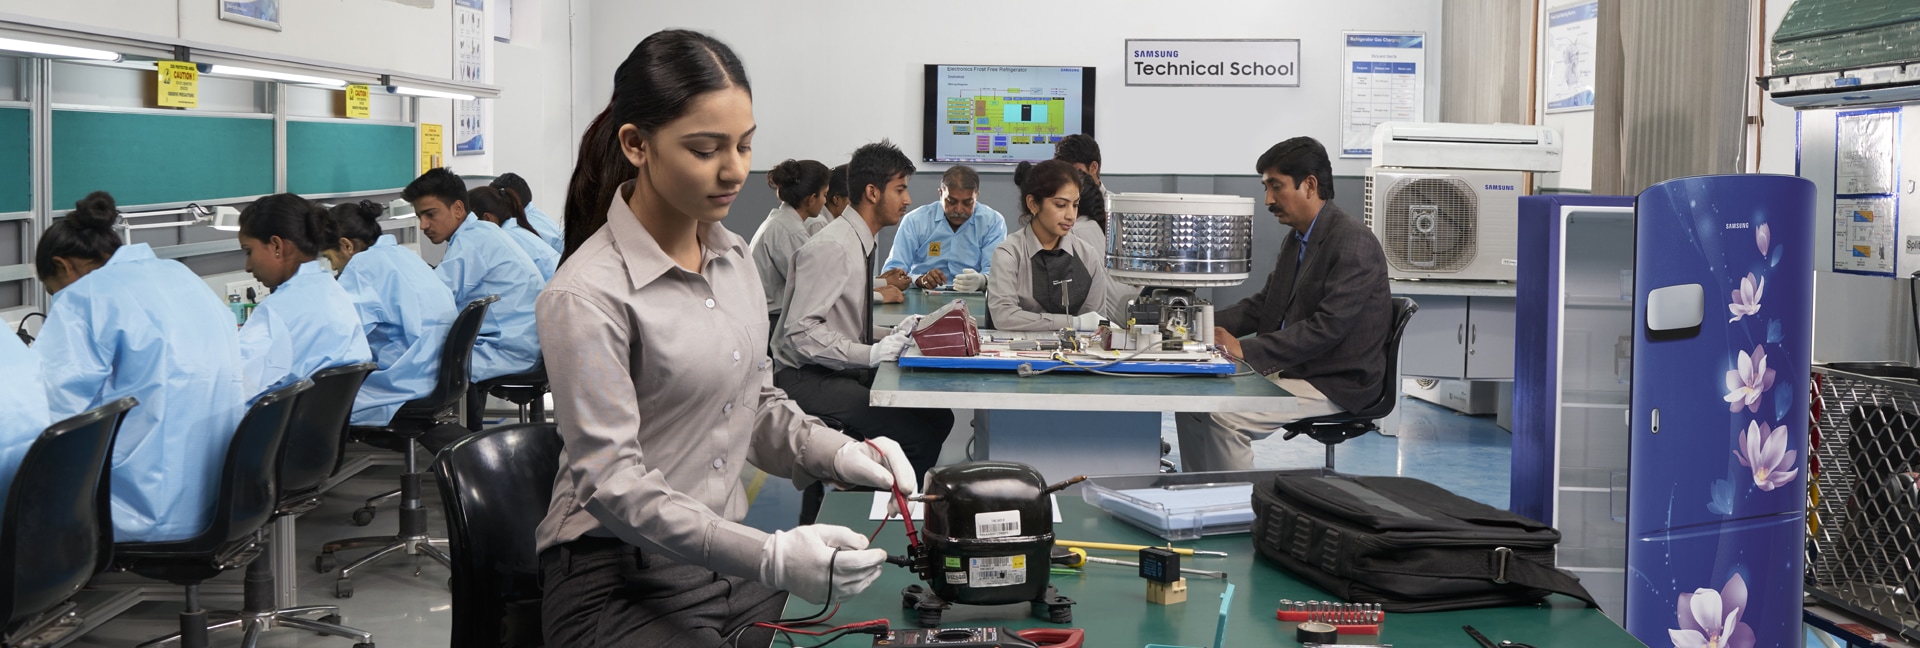 Samsung Technical School - A thoughtful CSR by Samsung India